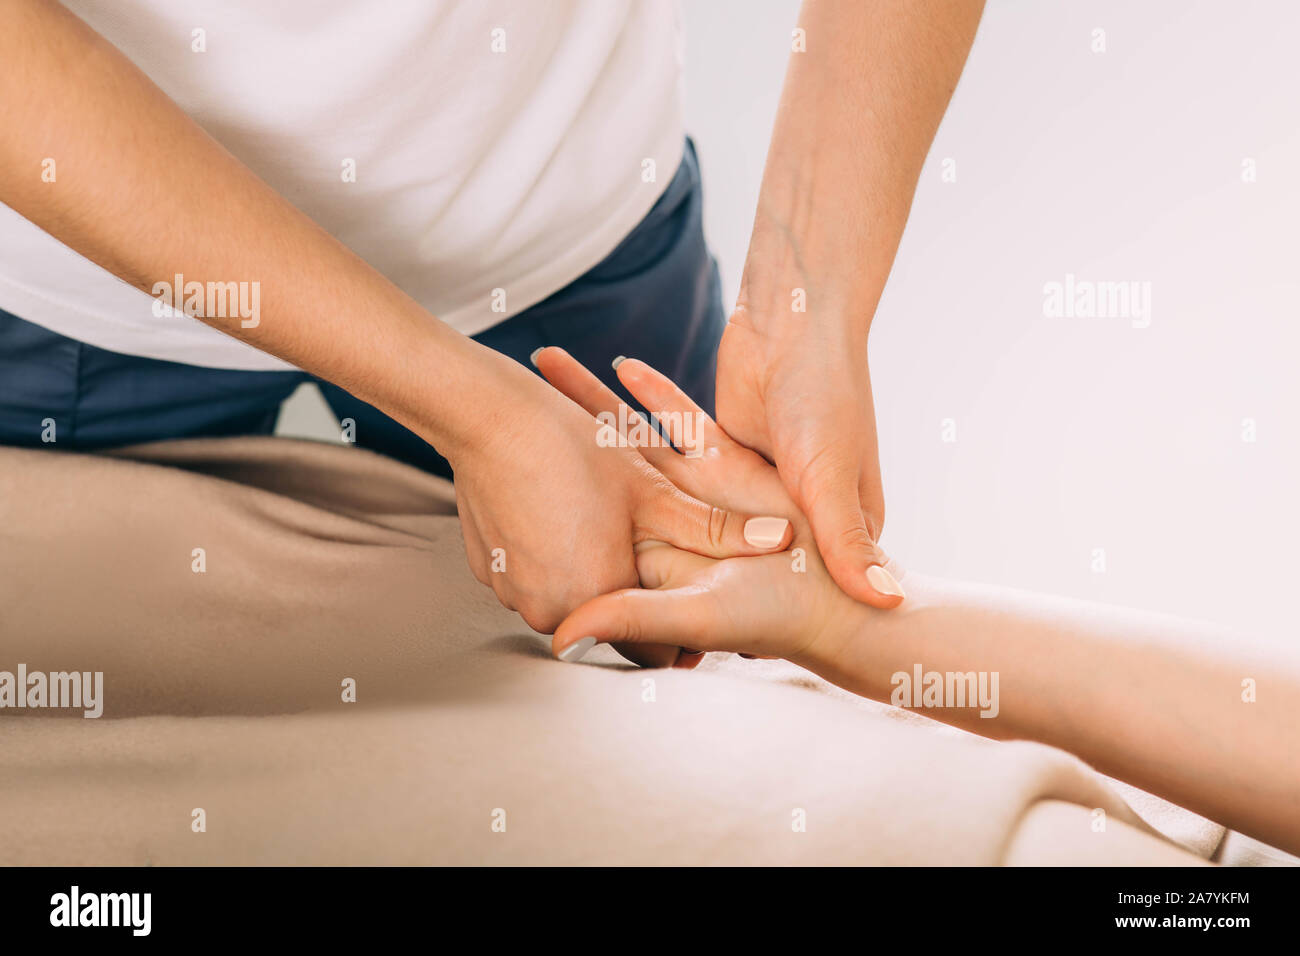 cropped female hand while hand massage. woman receives a hand massage from a professional massage therapist Stock Photo